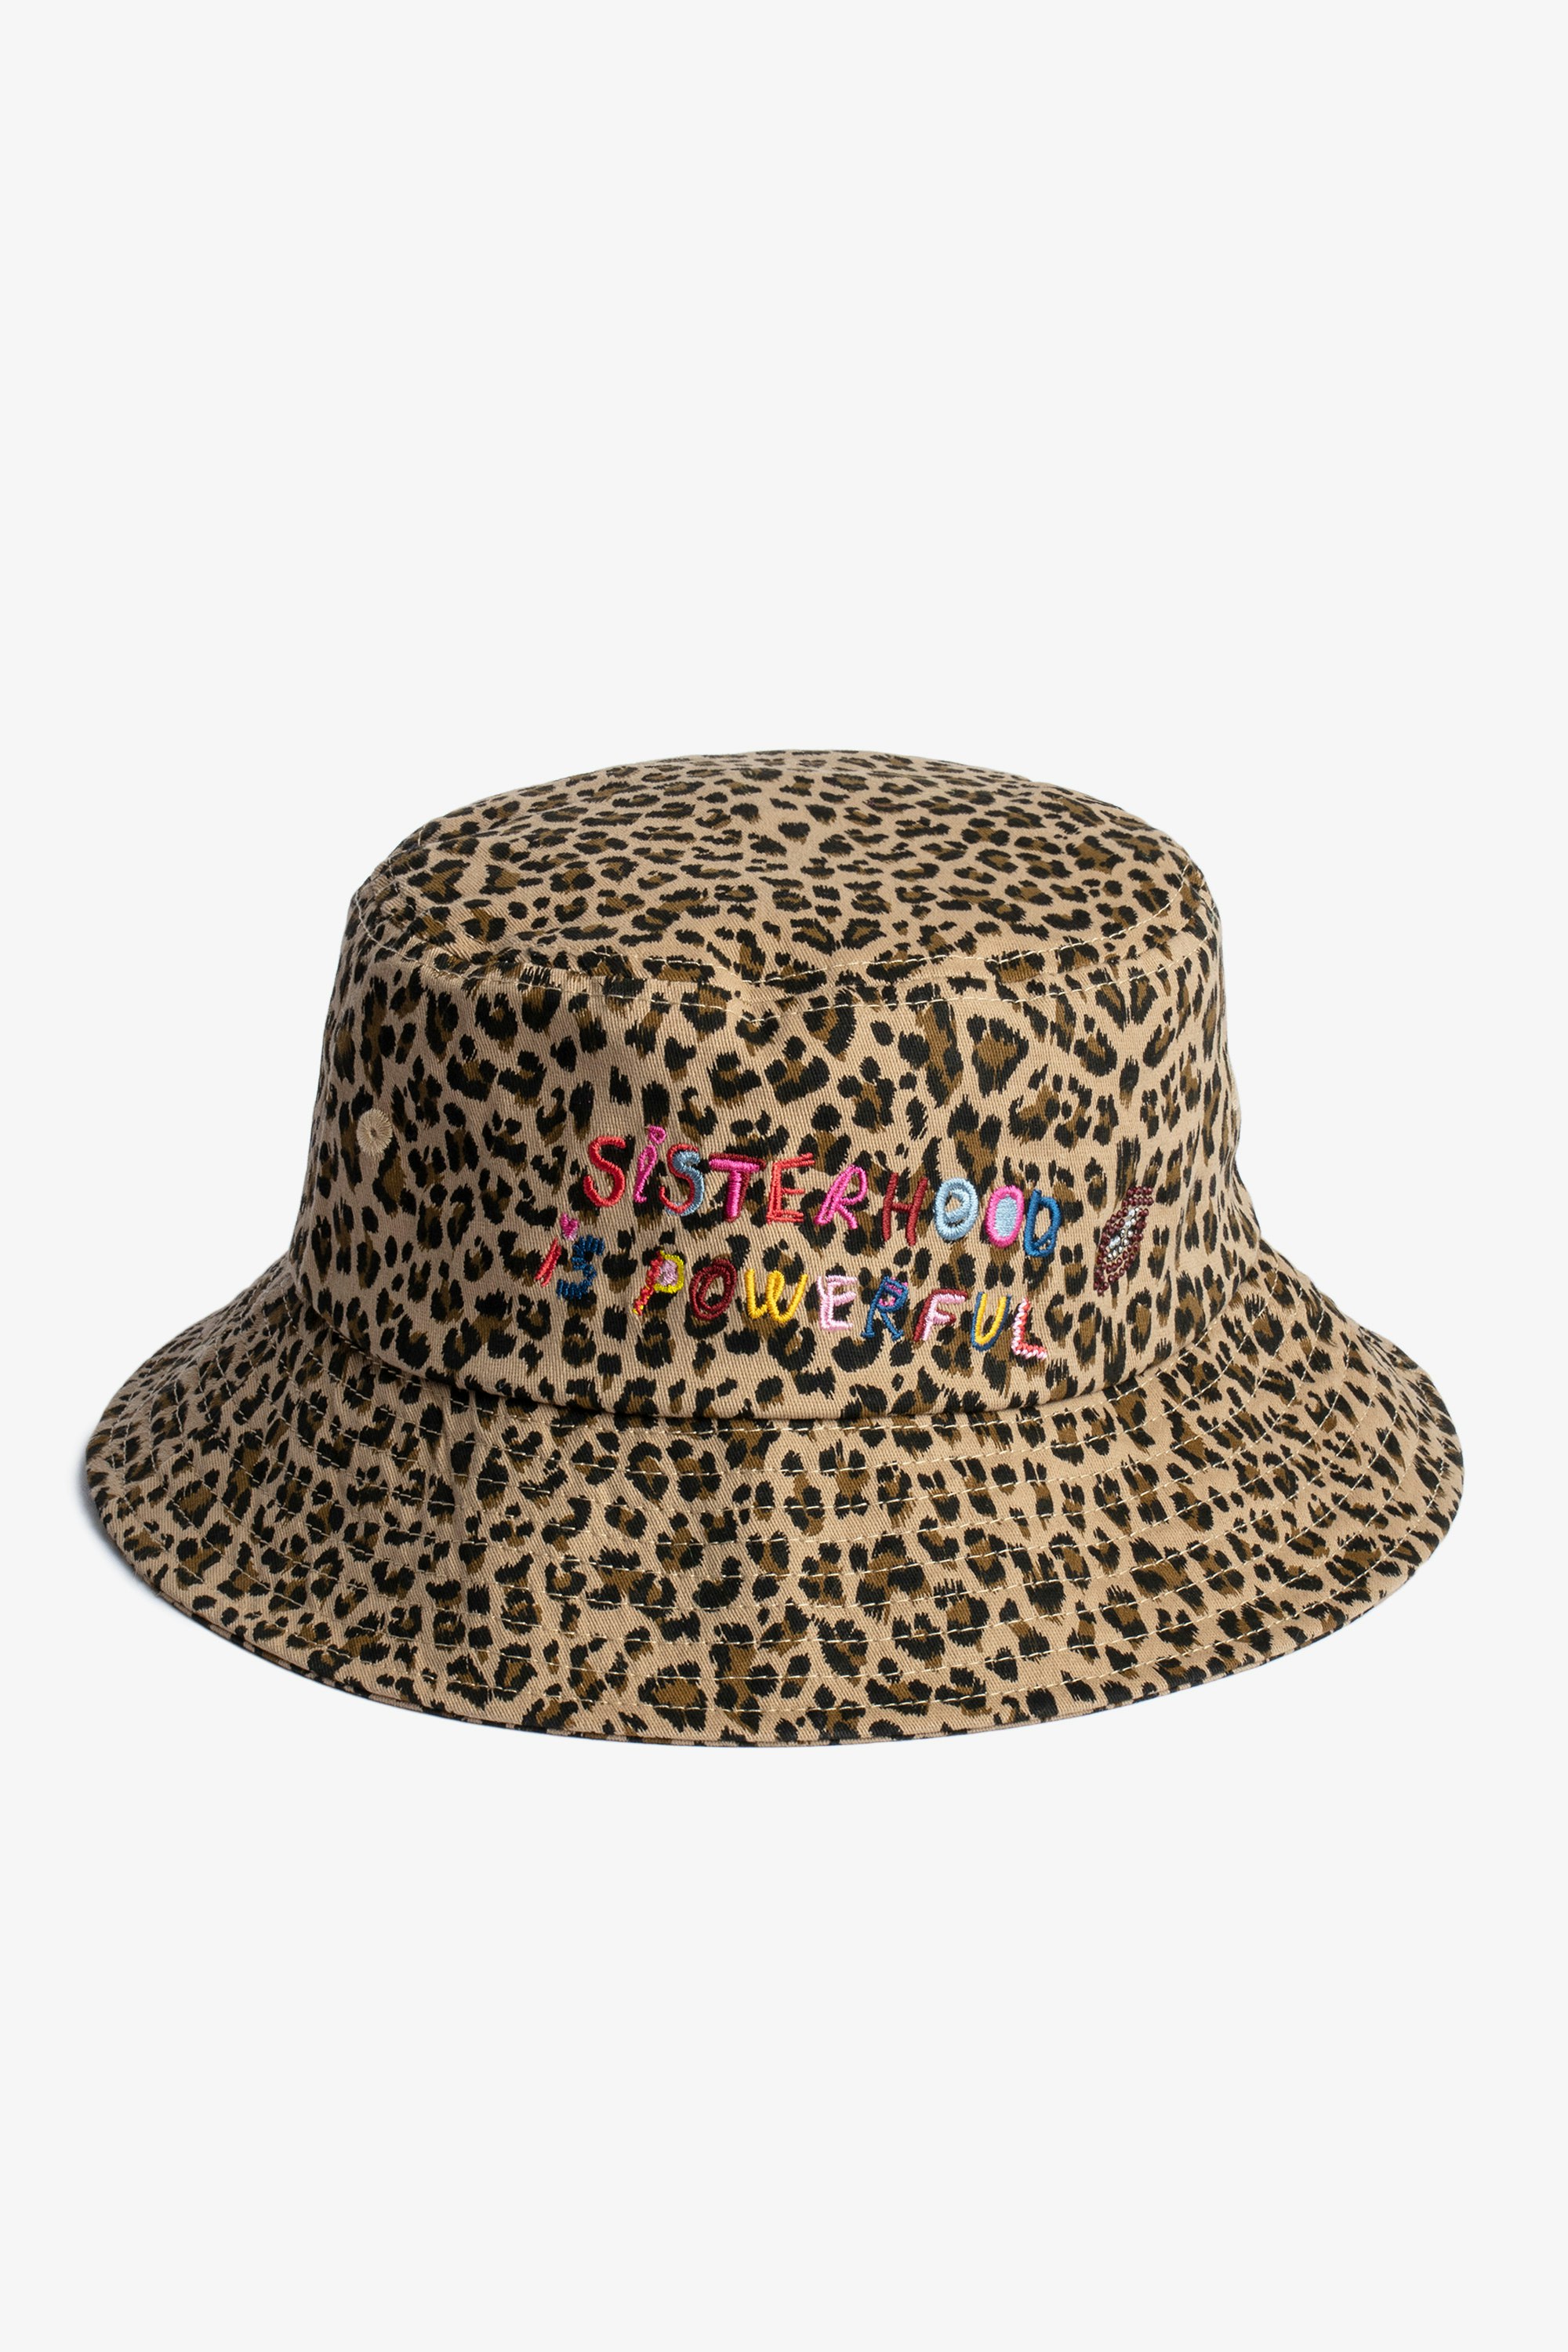 Band of Sisters Bucket 帽子 Band of Sisters women’s black cotton embroidered bucket hat